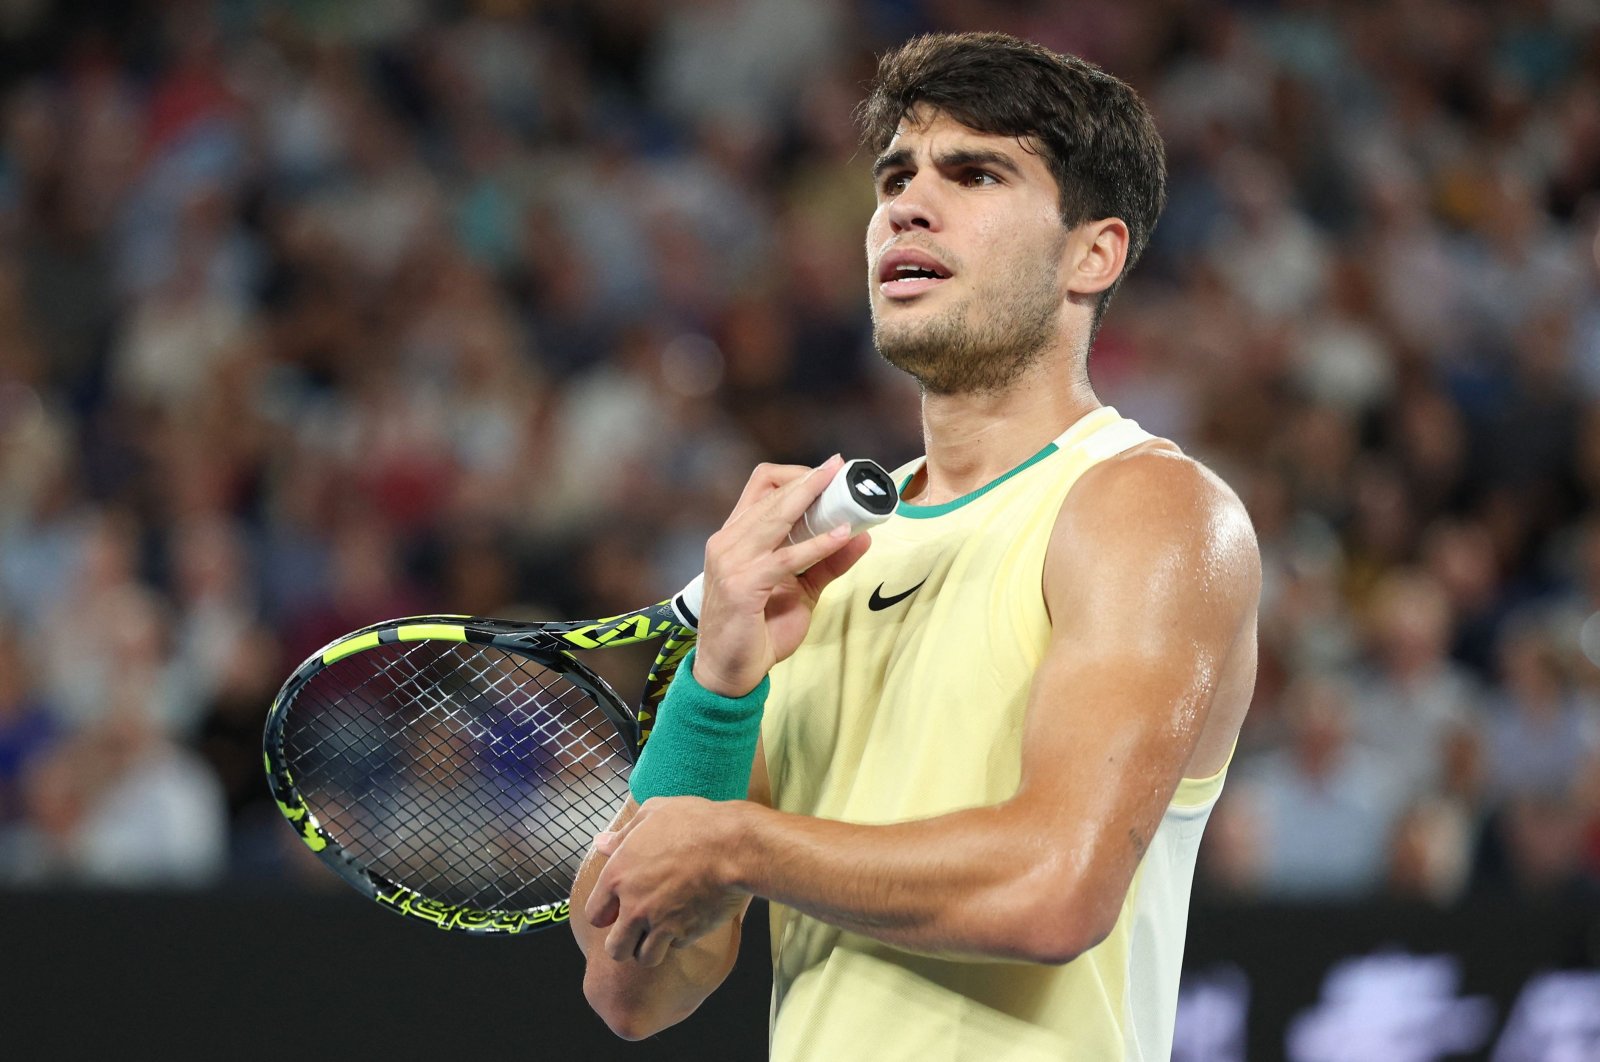 Spain's Carlos Alcaraz reacts after a point against Germany's Alexander Zverev during their men's singles quarterfinal match on Day 11 of the Australian Open, Melbourne, Australia, Jan. 24, 2024. (AFP Photo)